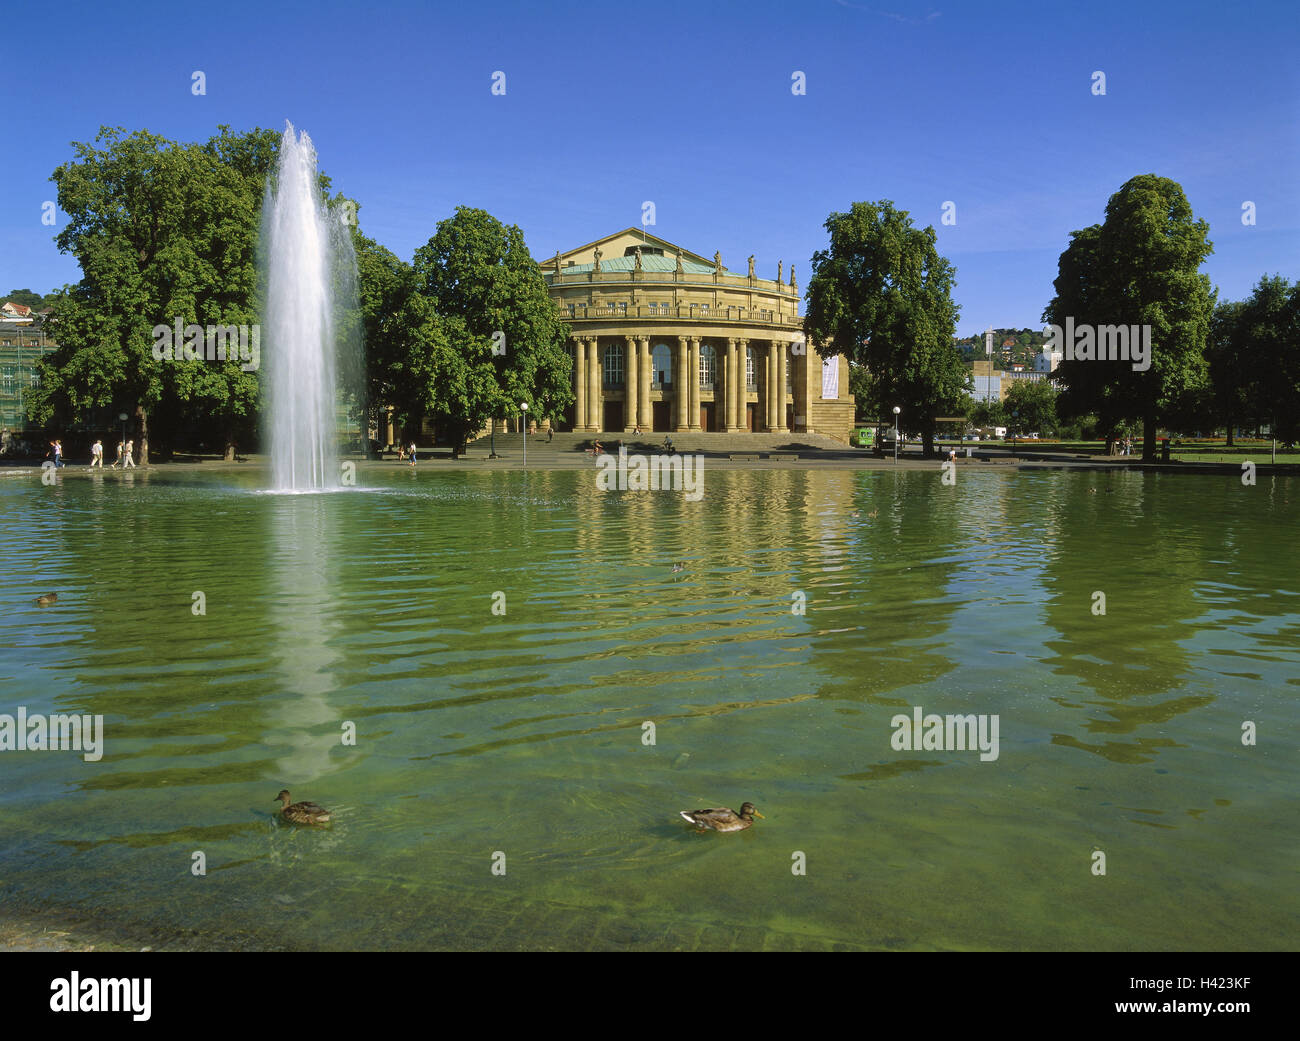 Germany, Baden-Wurttemberg, Stuttgart, state theatre, park, pond, water jet, Europe, town, Württembergisches state theatre, 'big house', building, structure, architecture, park, lake, play water, place of interest, summer Stock Photo